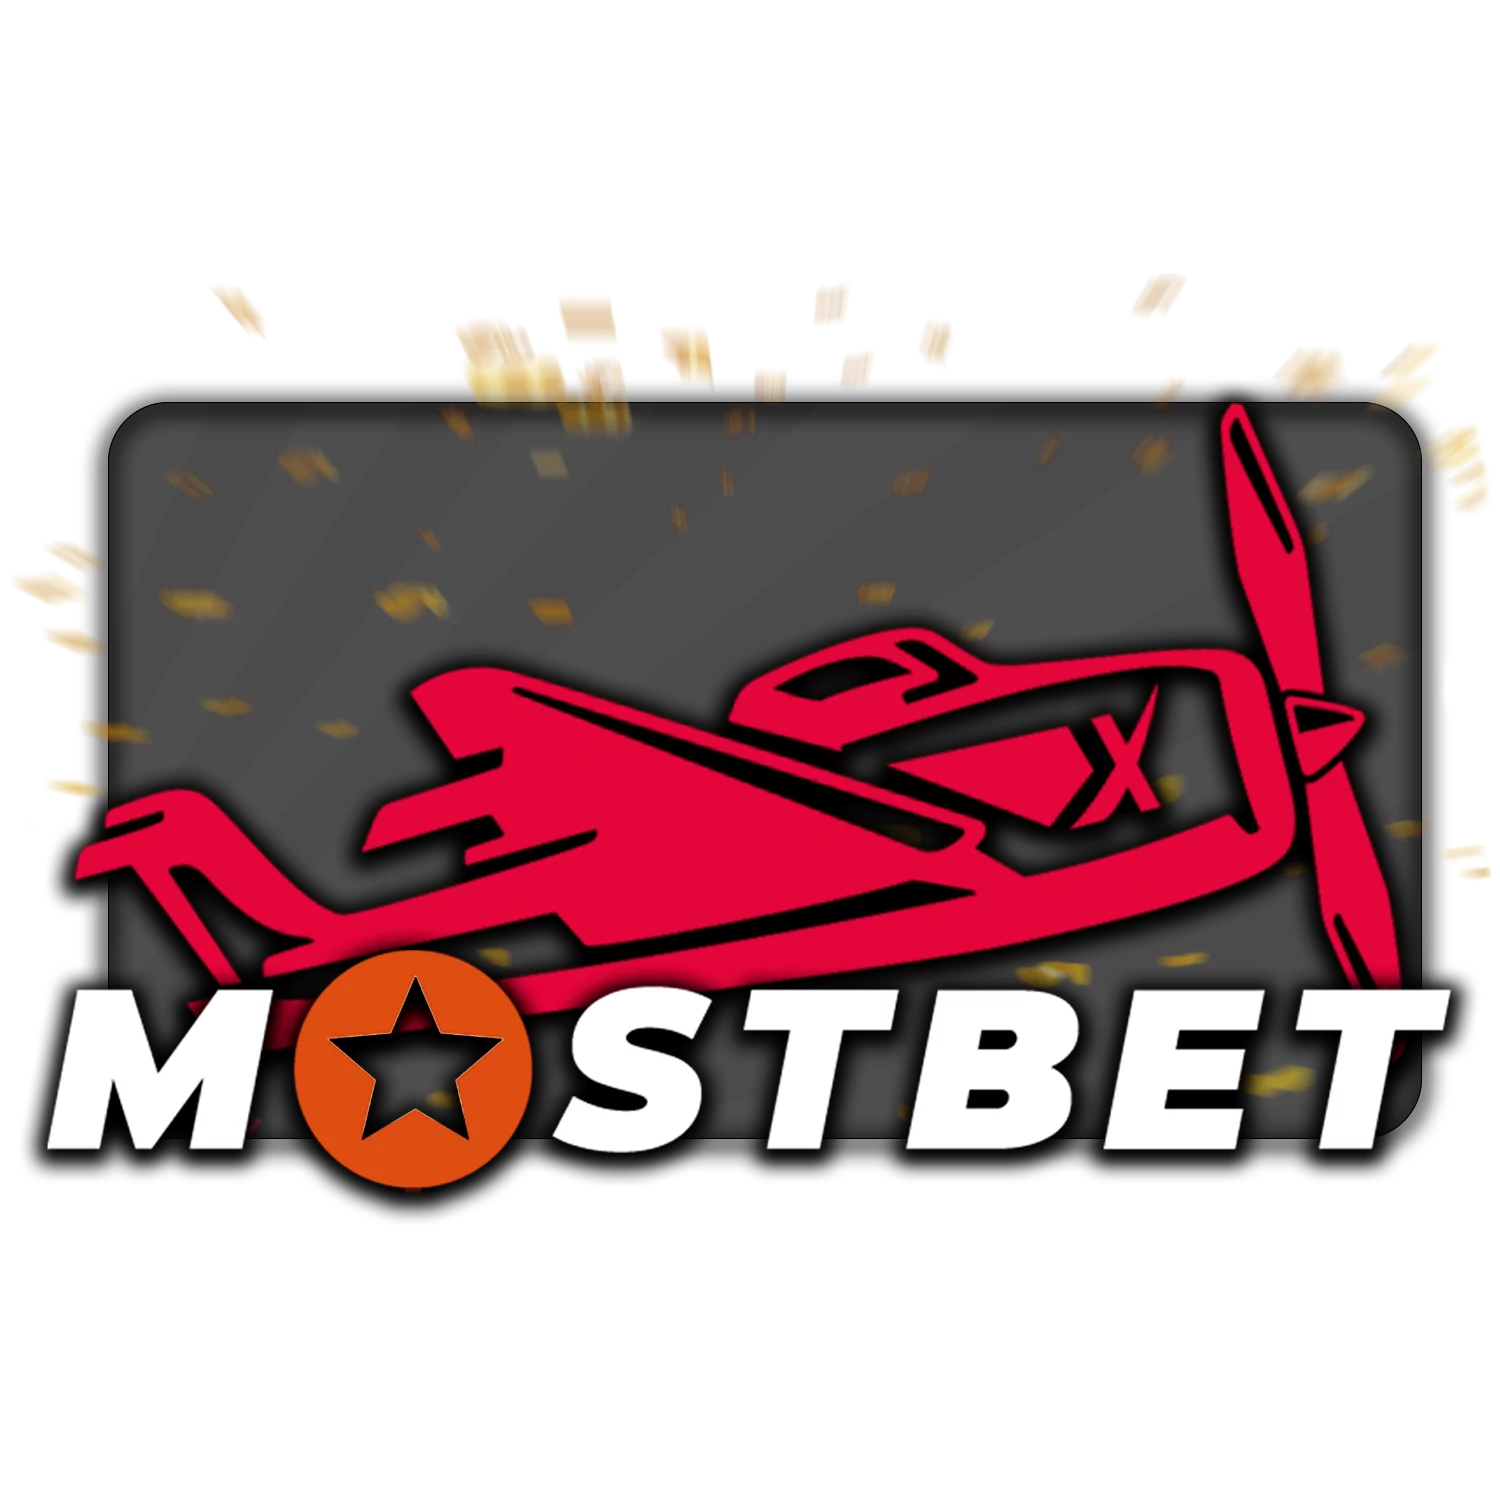 Learn To Mostbet bookmaker and casino company in Bangladesh Like A Professional